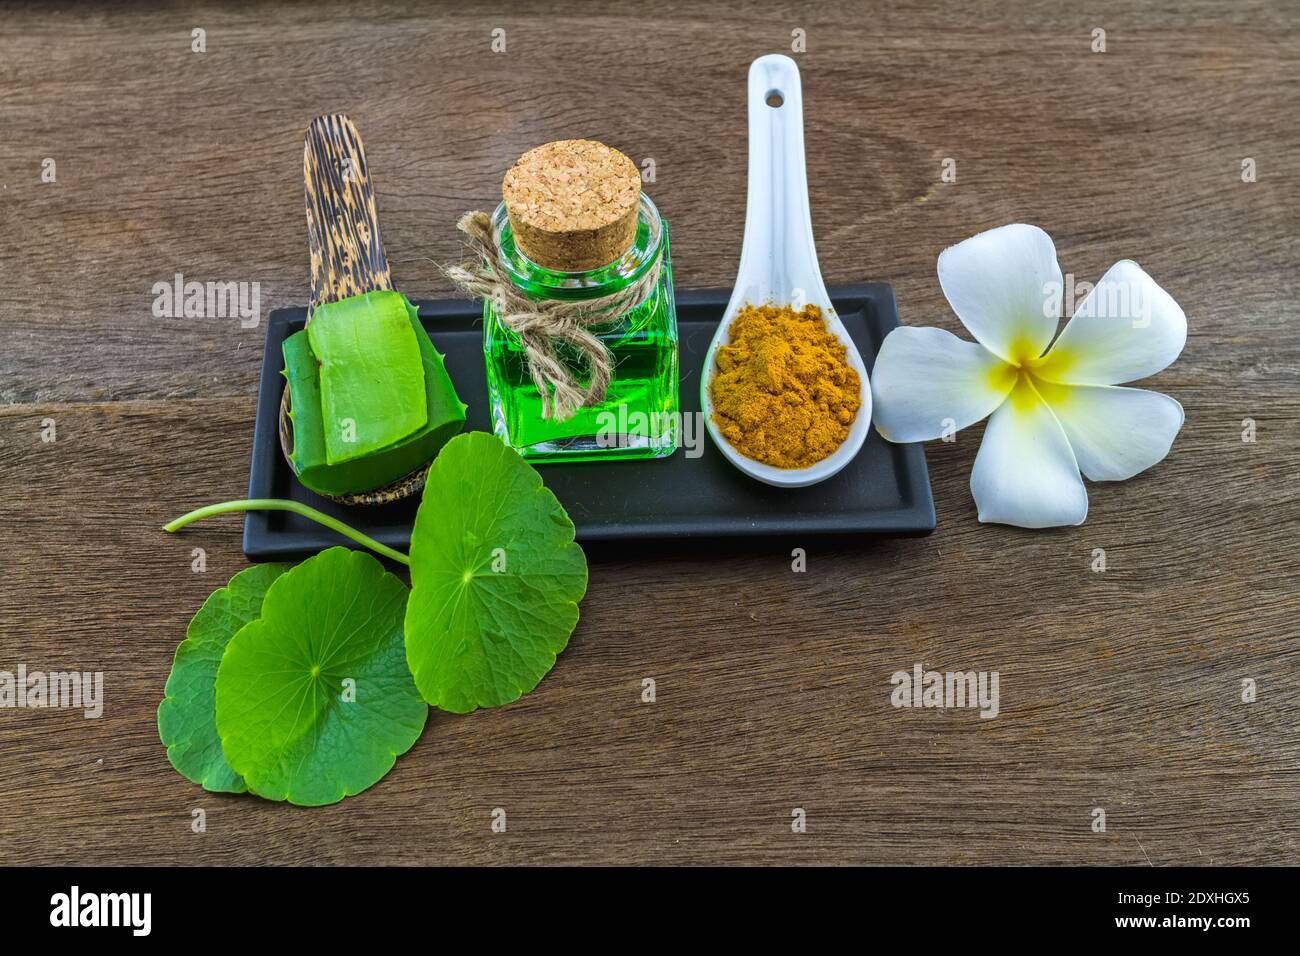 Spa herbal ( white frangipani flowers ,turmeric powder in white spoon ,Aloe vera essential oil and gel,Green Asiatic Pennywort ) on wooden background Stock Photo